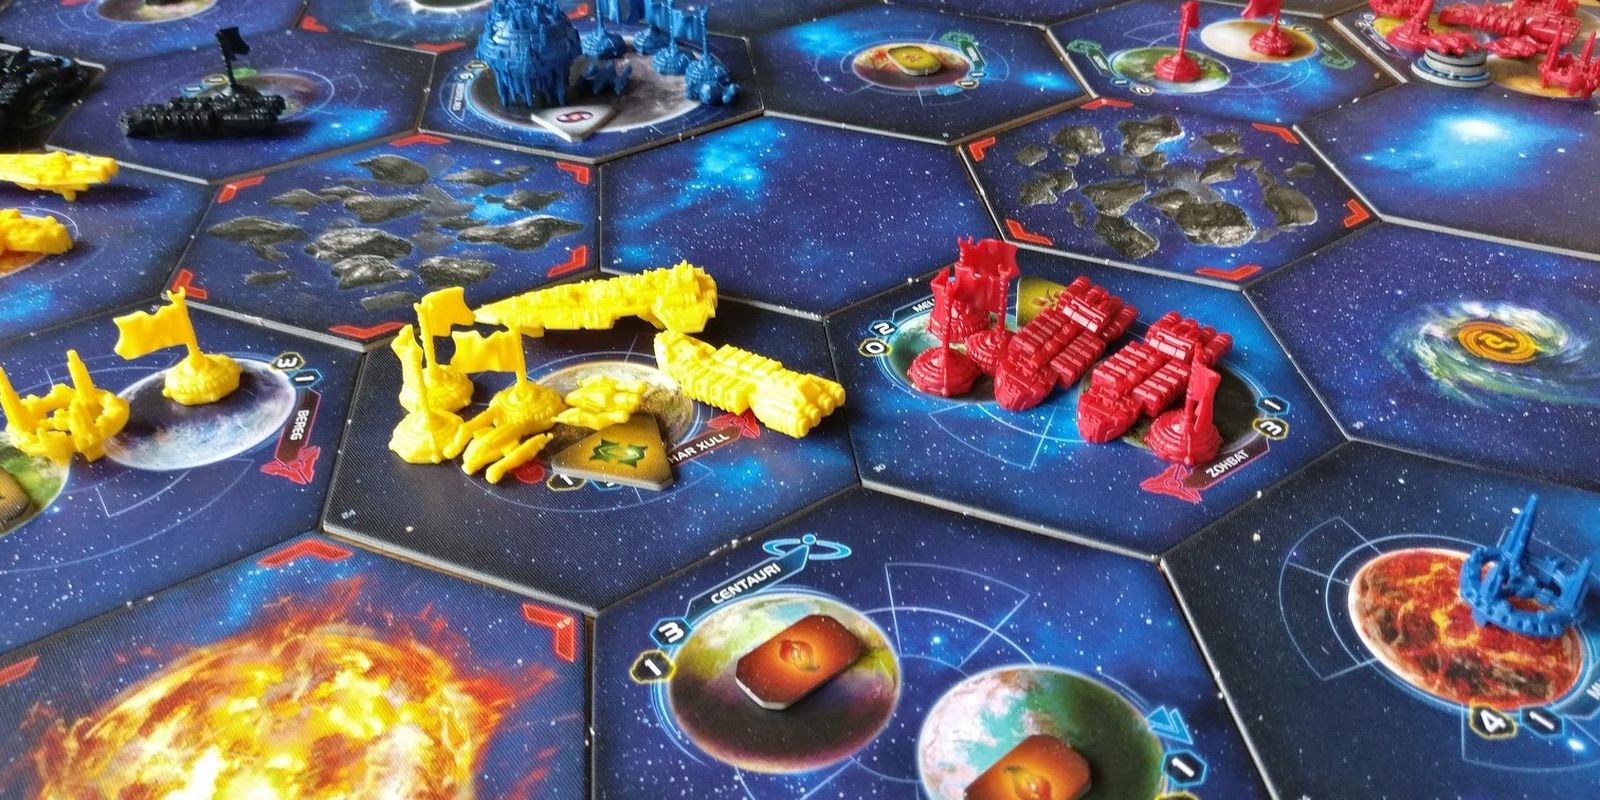 bgg gaia project strategy